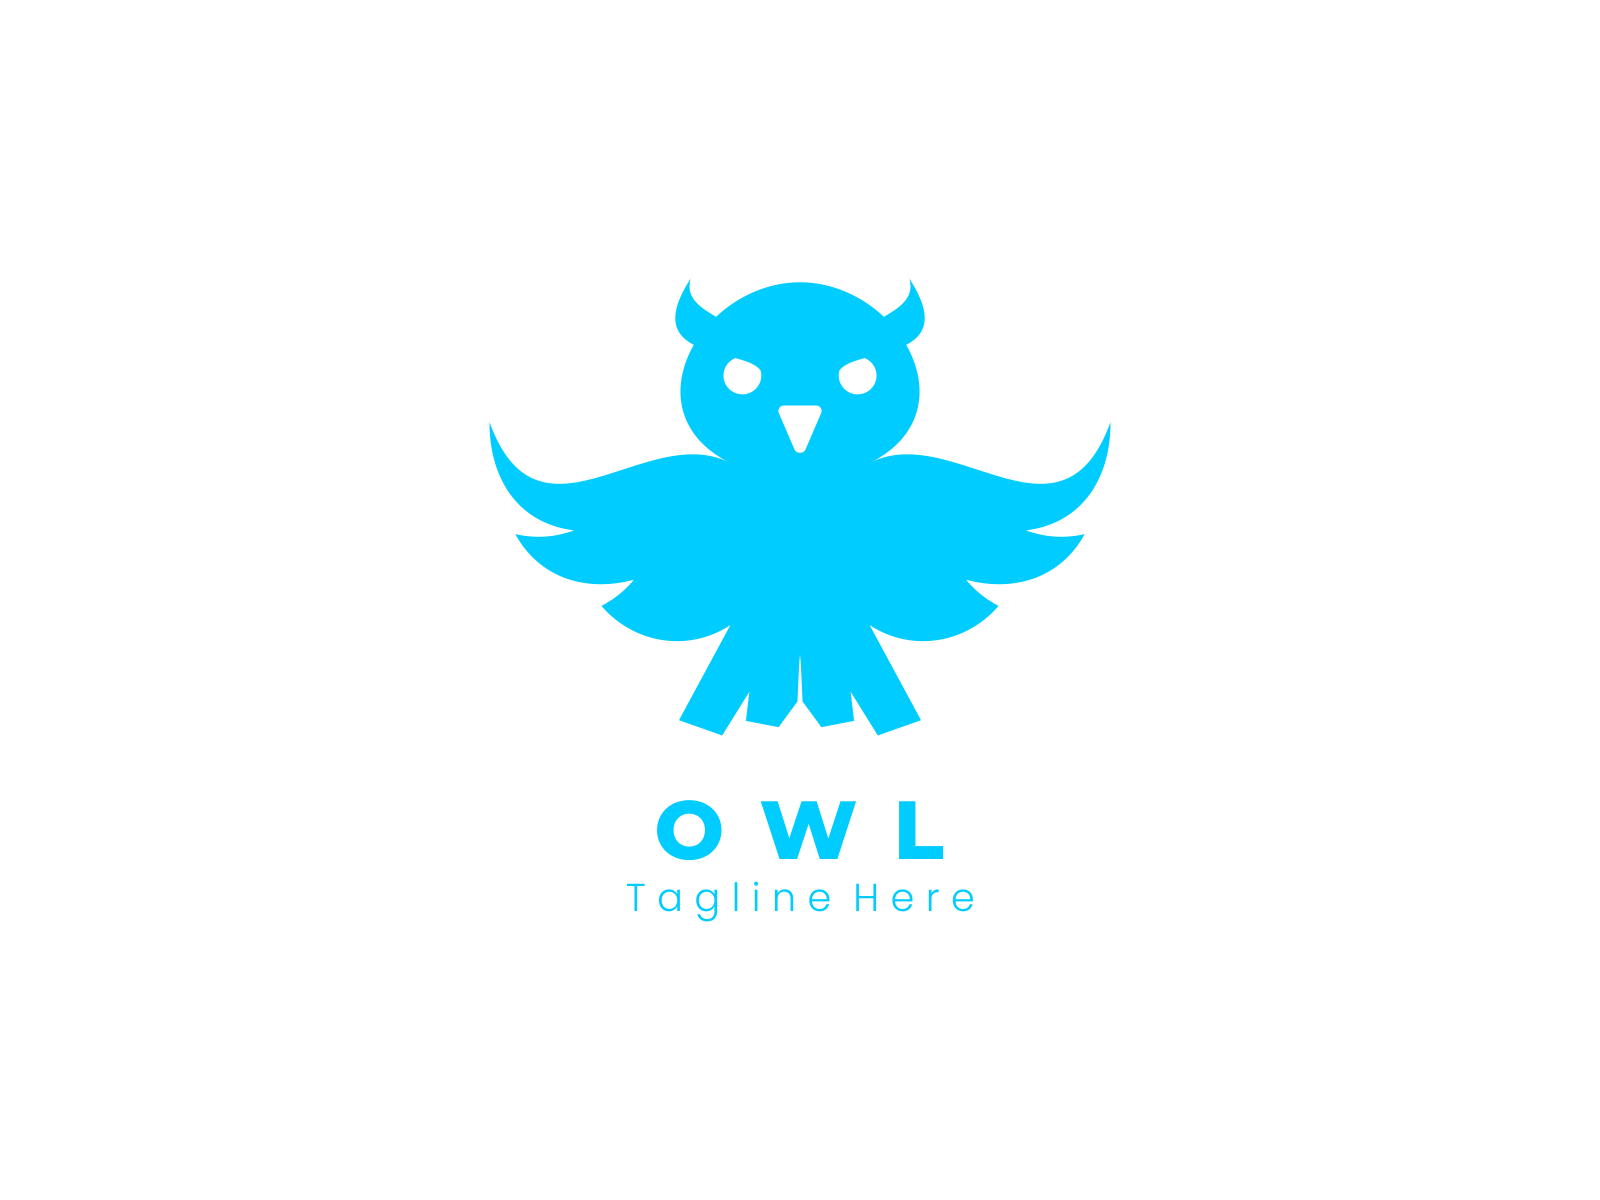 Owl Logo by Sketch Graphic on Dribbble